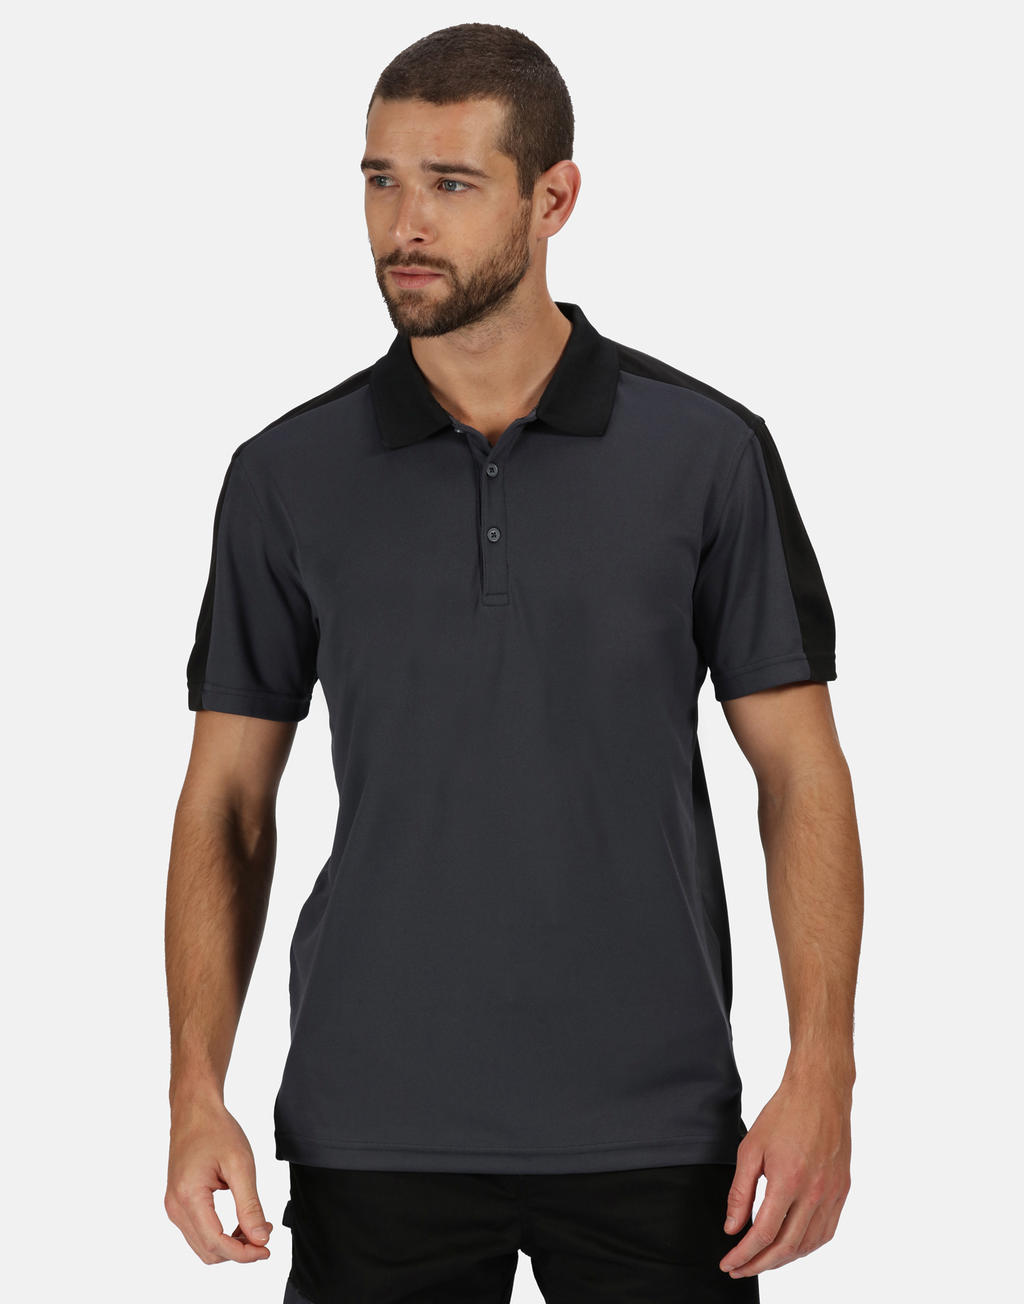  Contrast Coolweave Polo in Farbe Black/Seal Grey